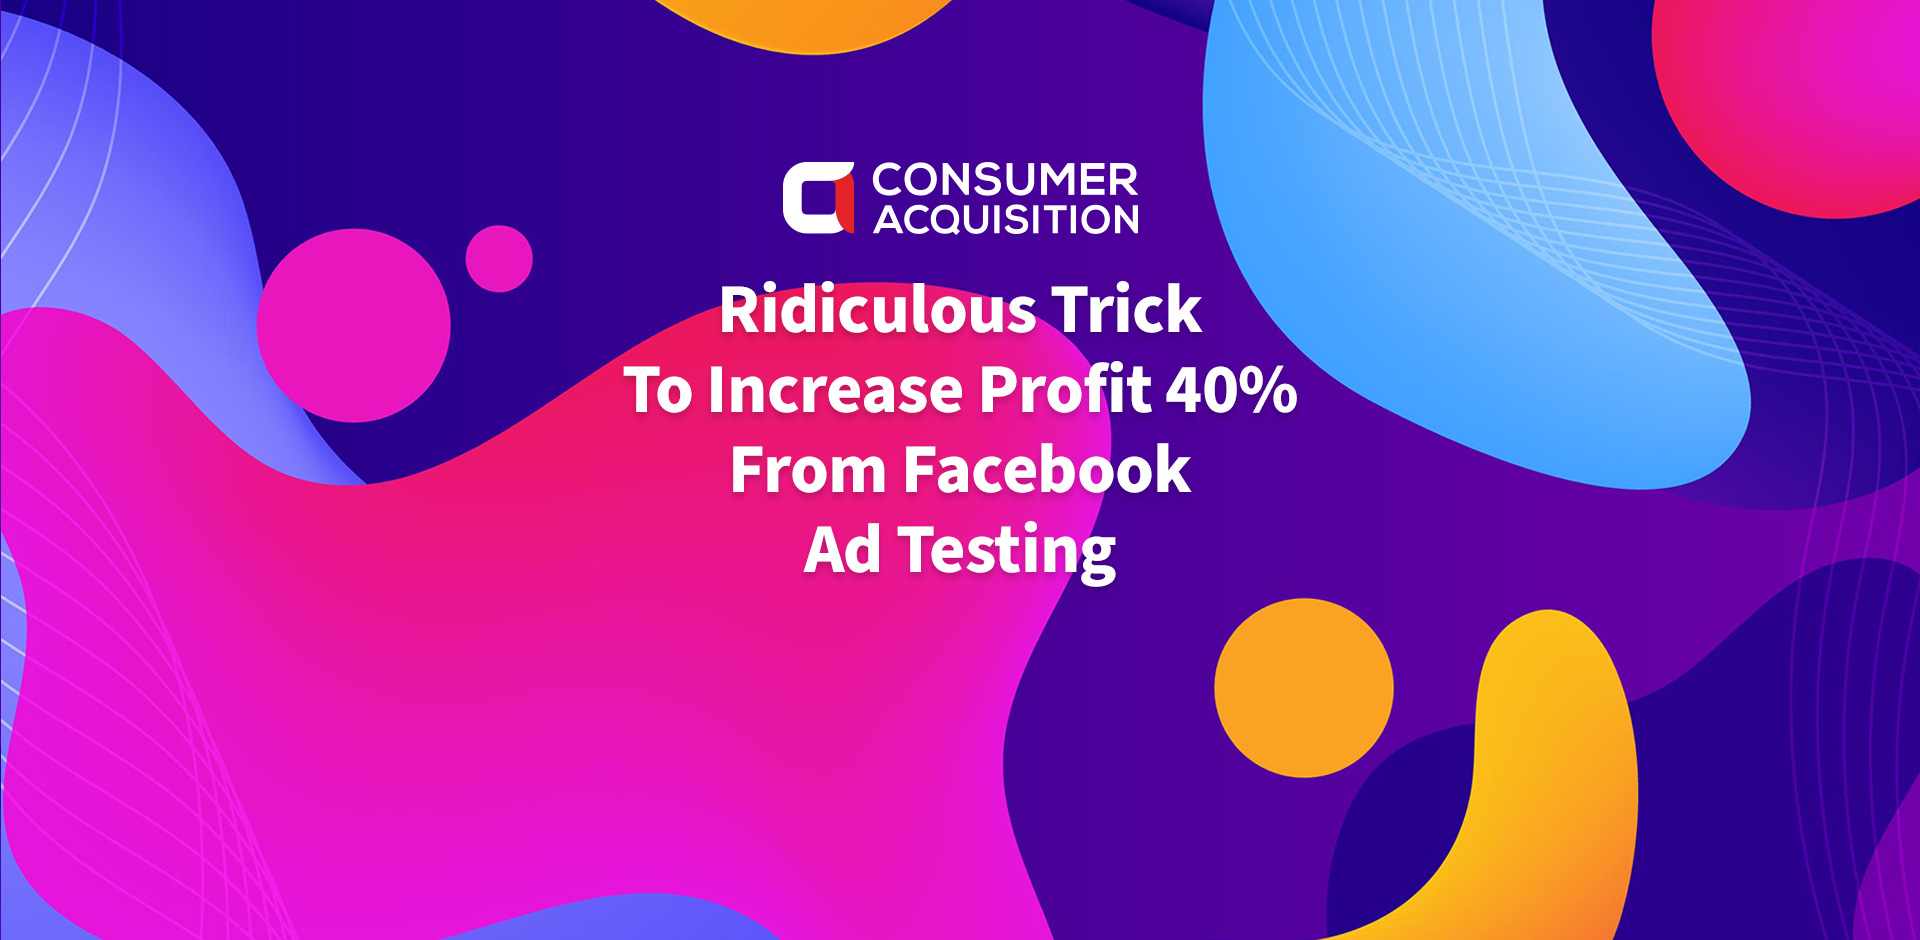 Ridiculous Trick To Increase Profit 40% From Facebook Ad Testing